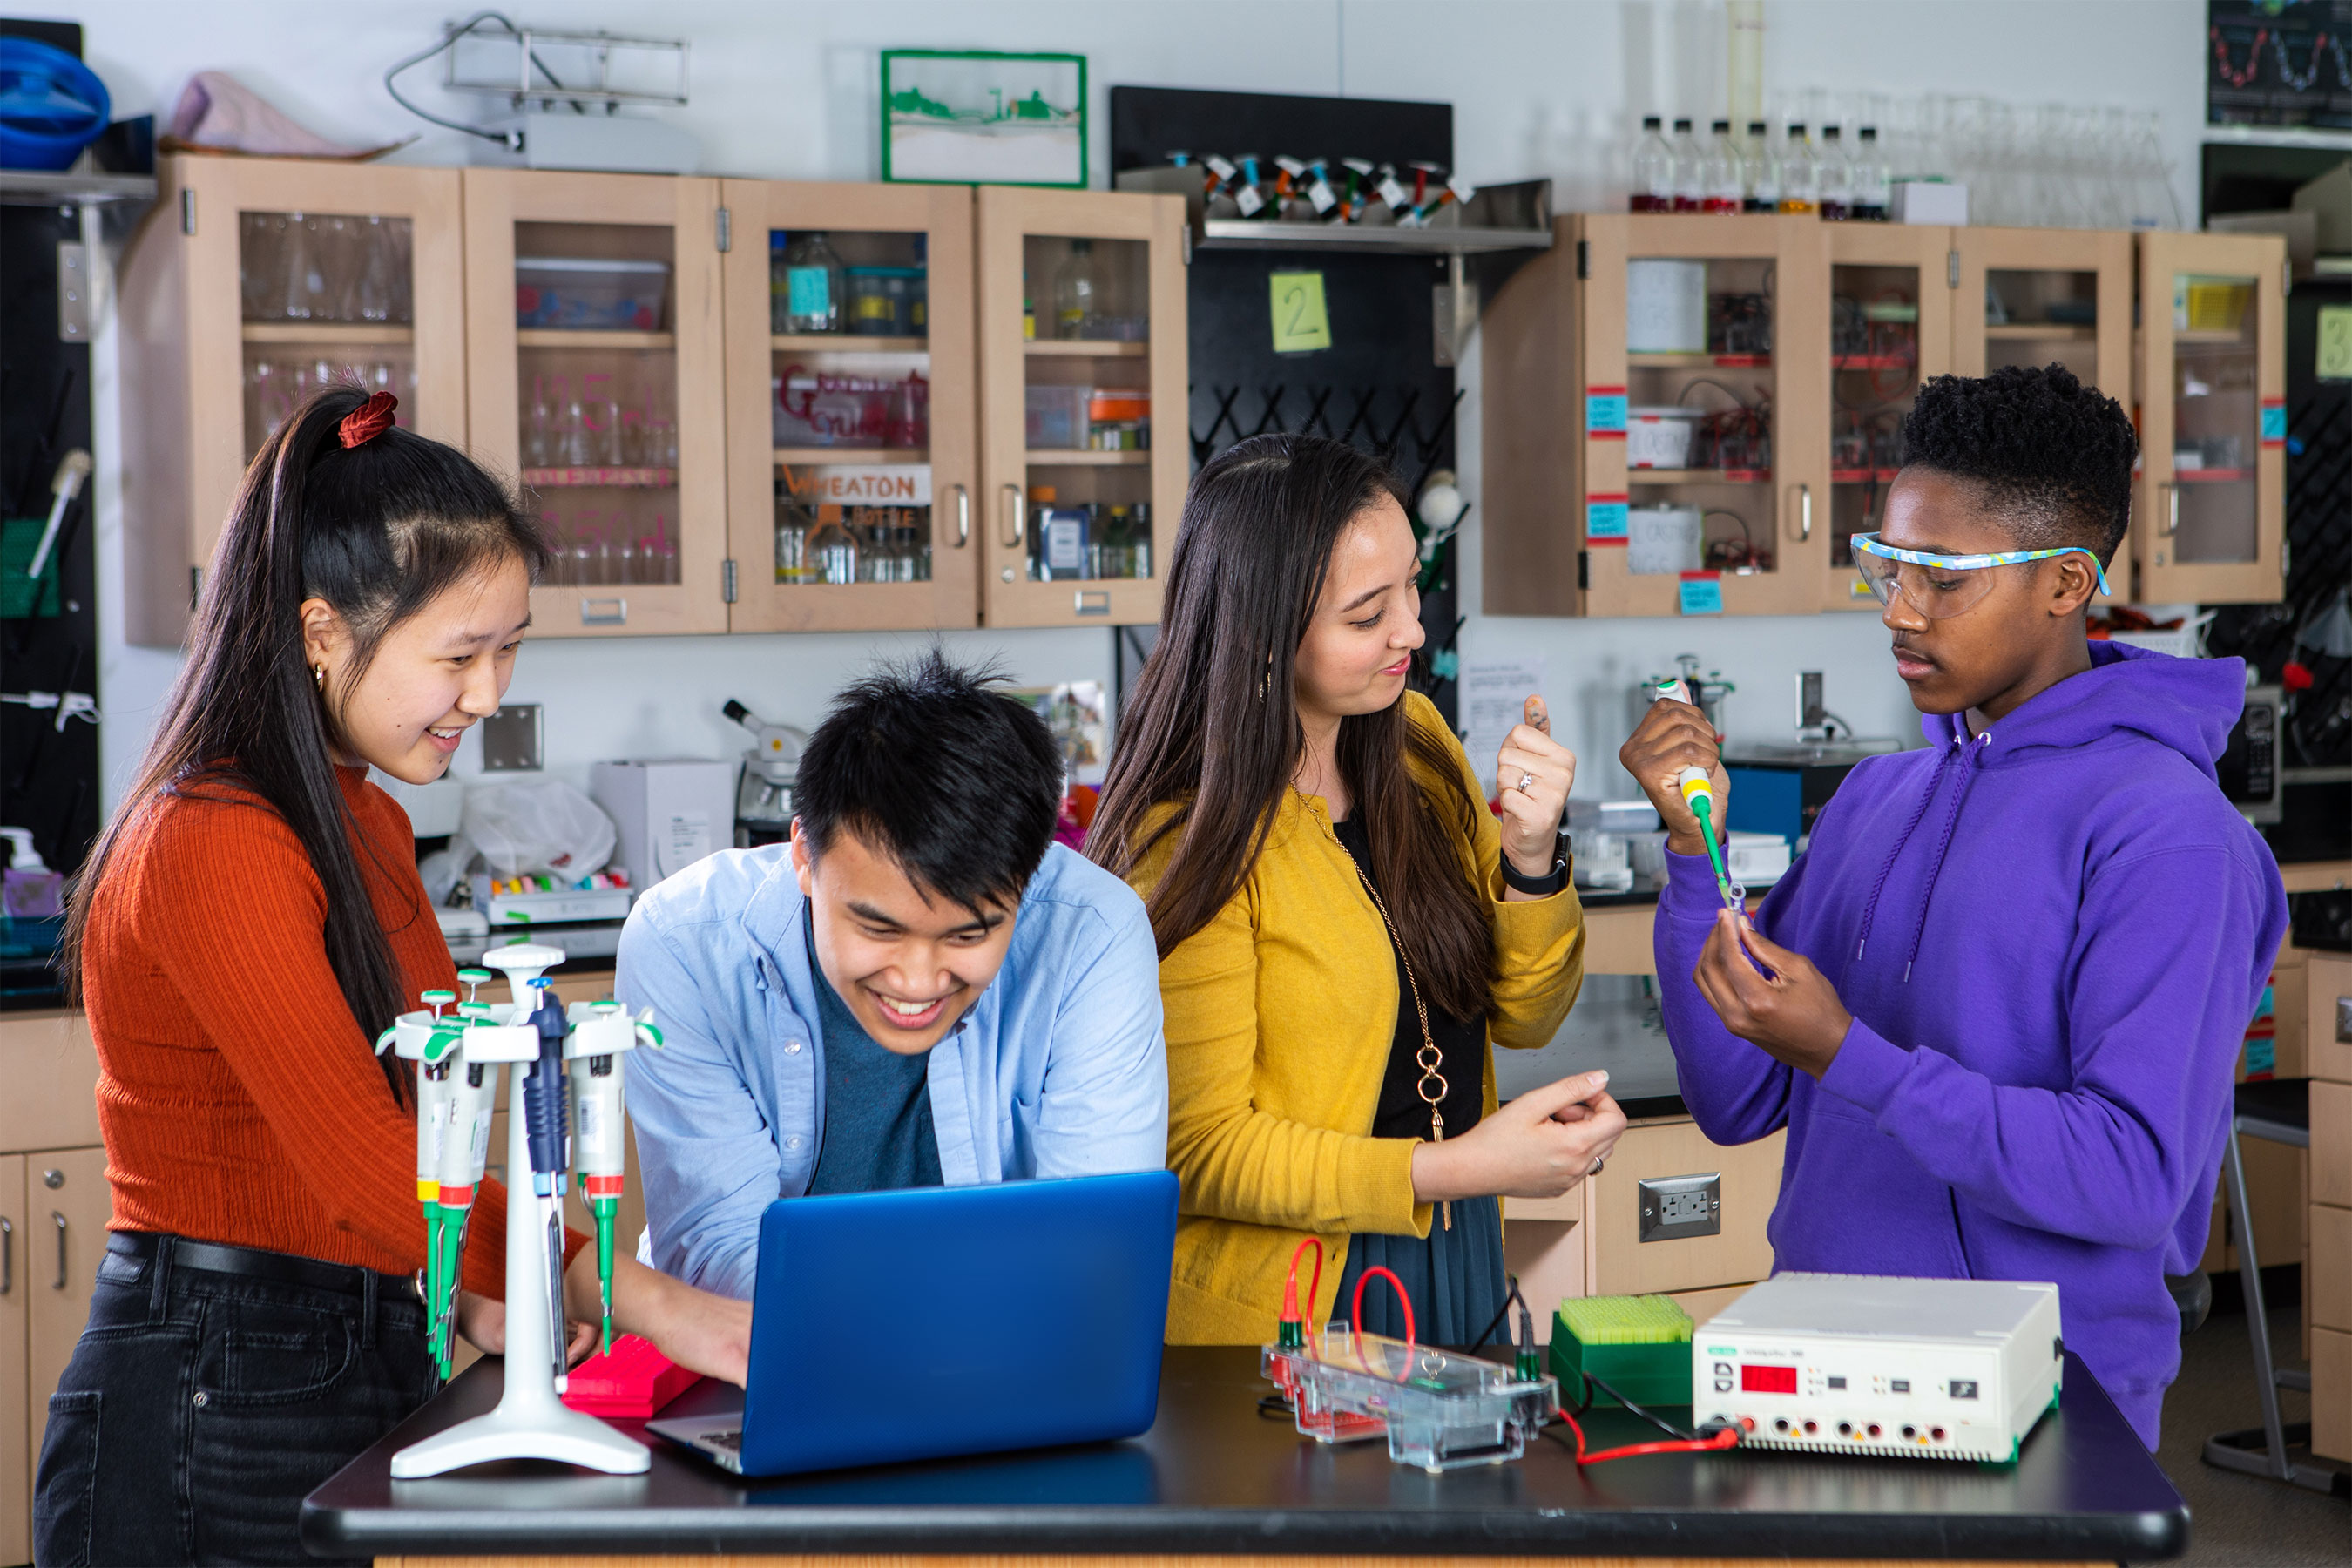 With LabXchange's interactive lab experiments, students have access to one of the most central aspects of being a scientist: working in a laboratory.